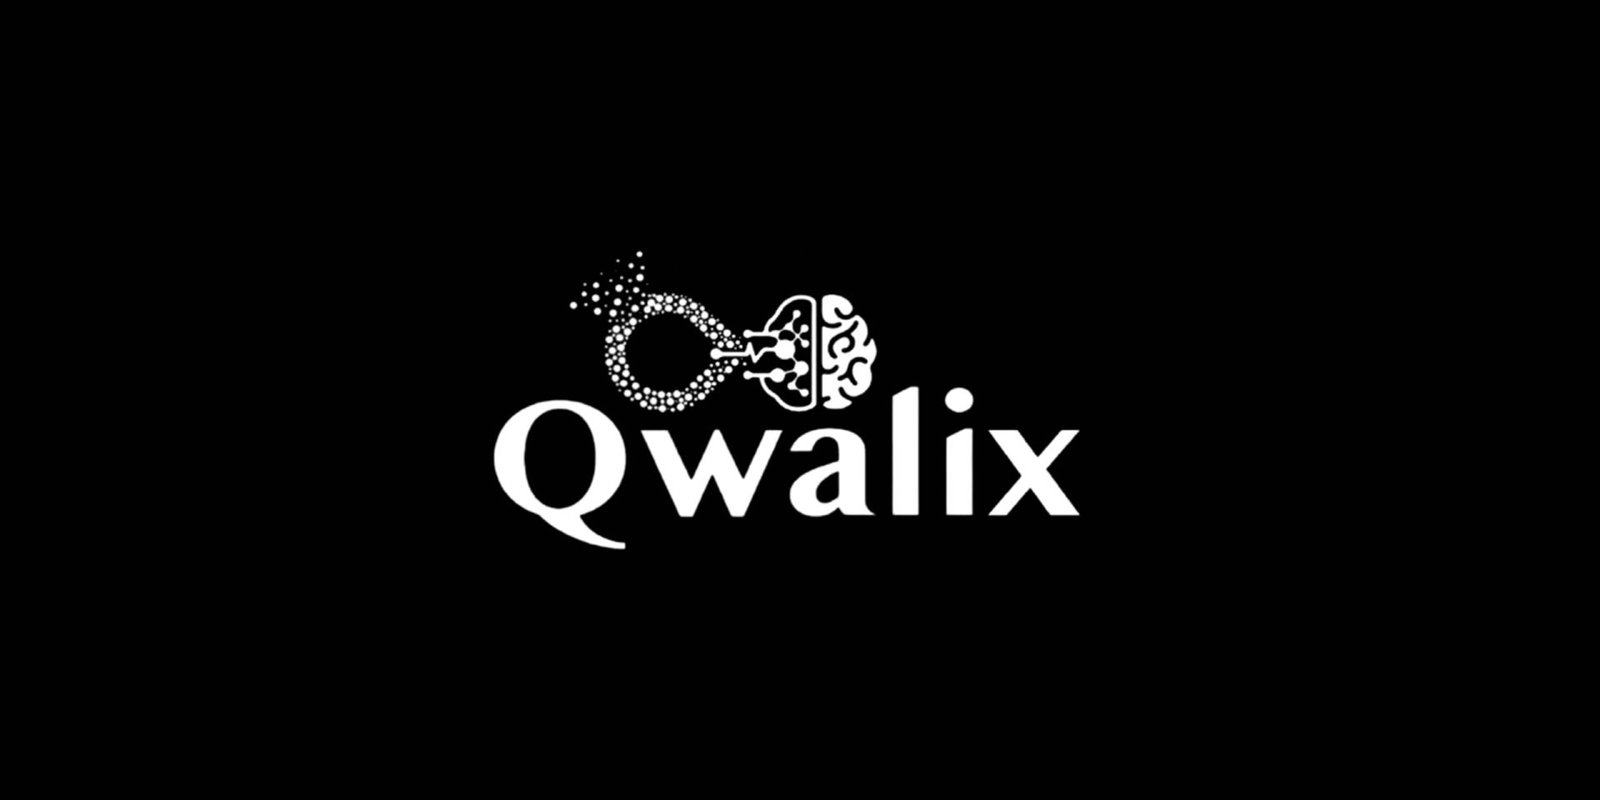 Home Qwalix | Optominds